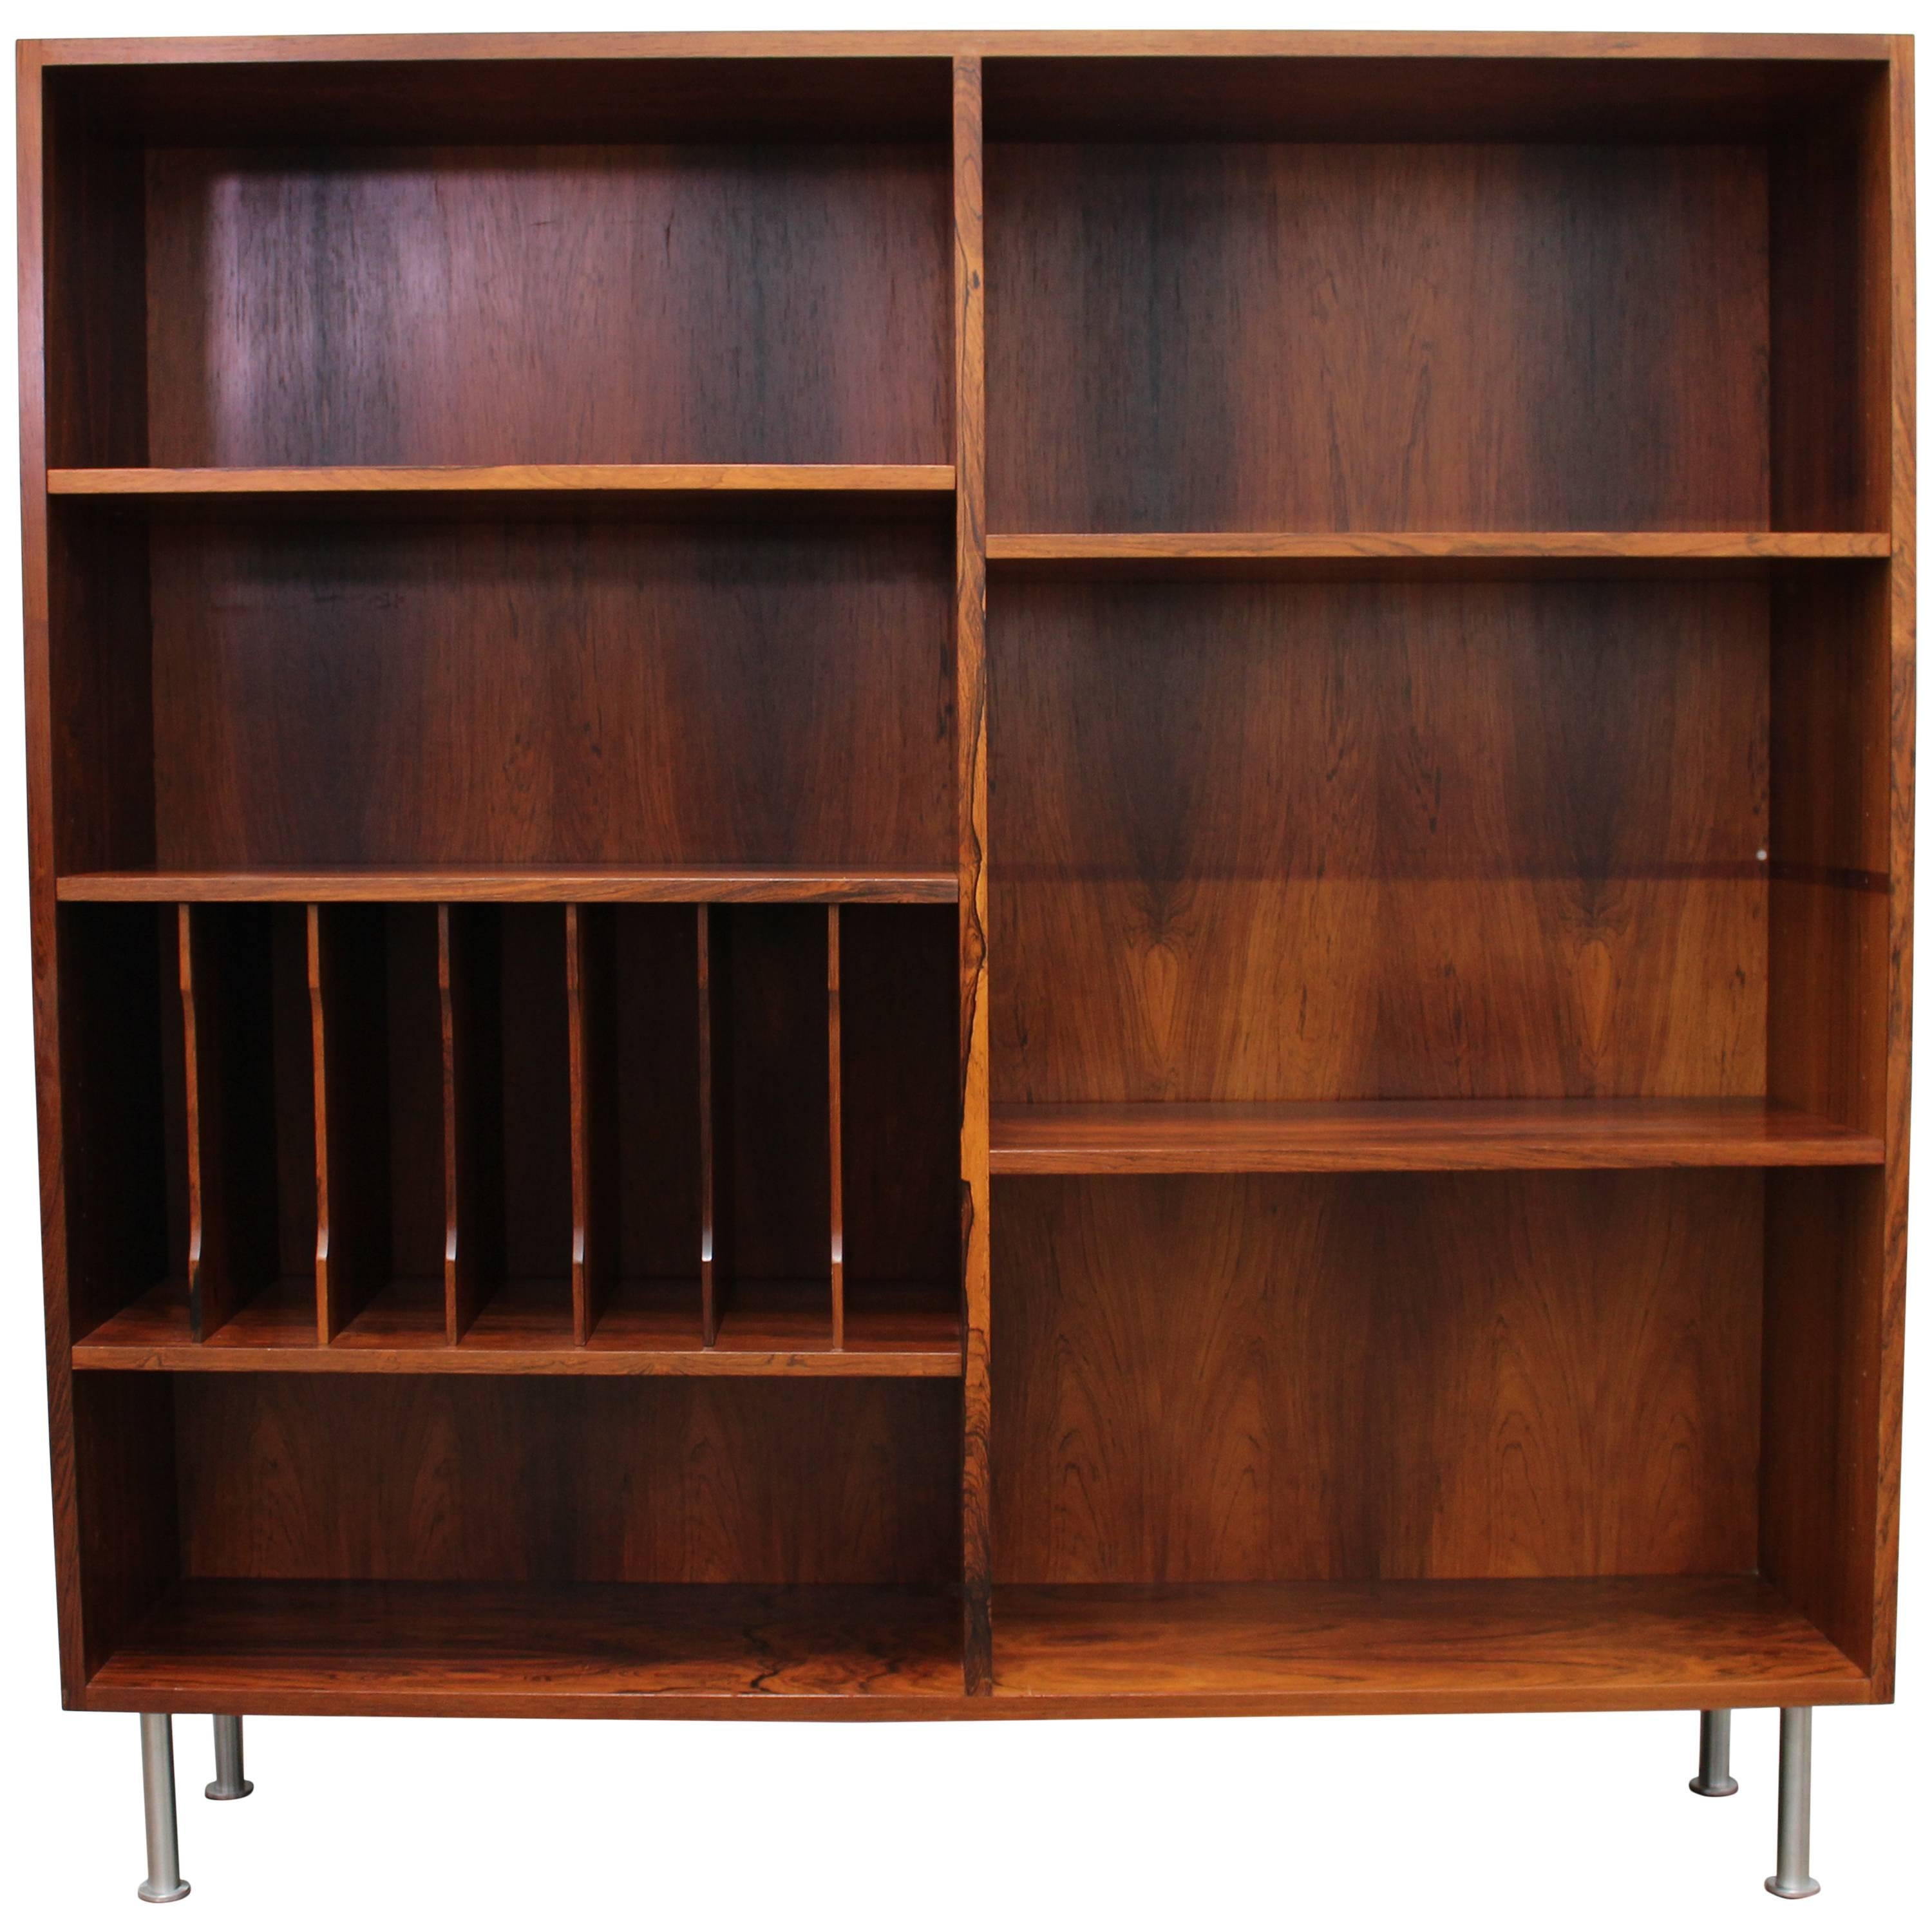 Rosewood Bookcase with Metal Legs, Danish Mid-Century Modern For Sale